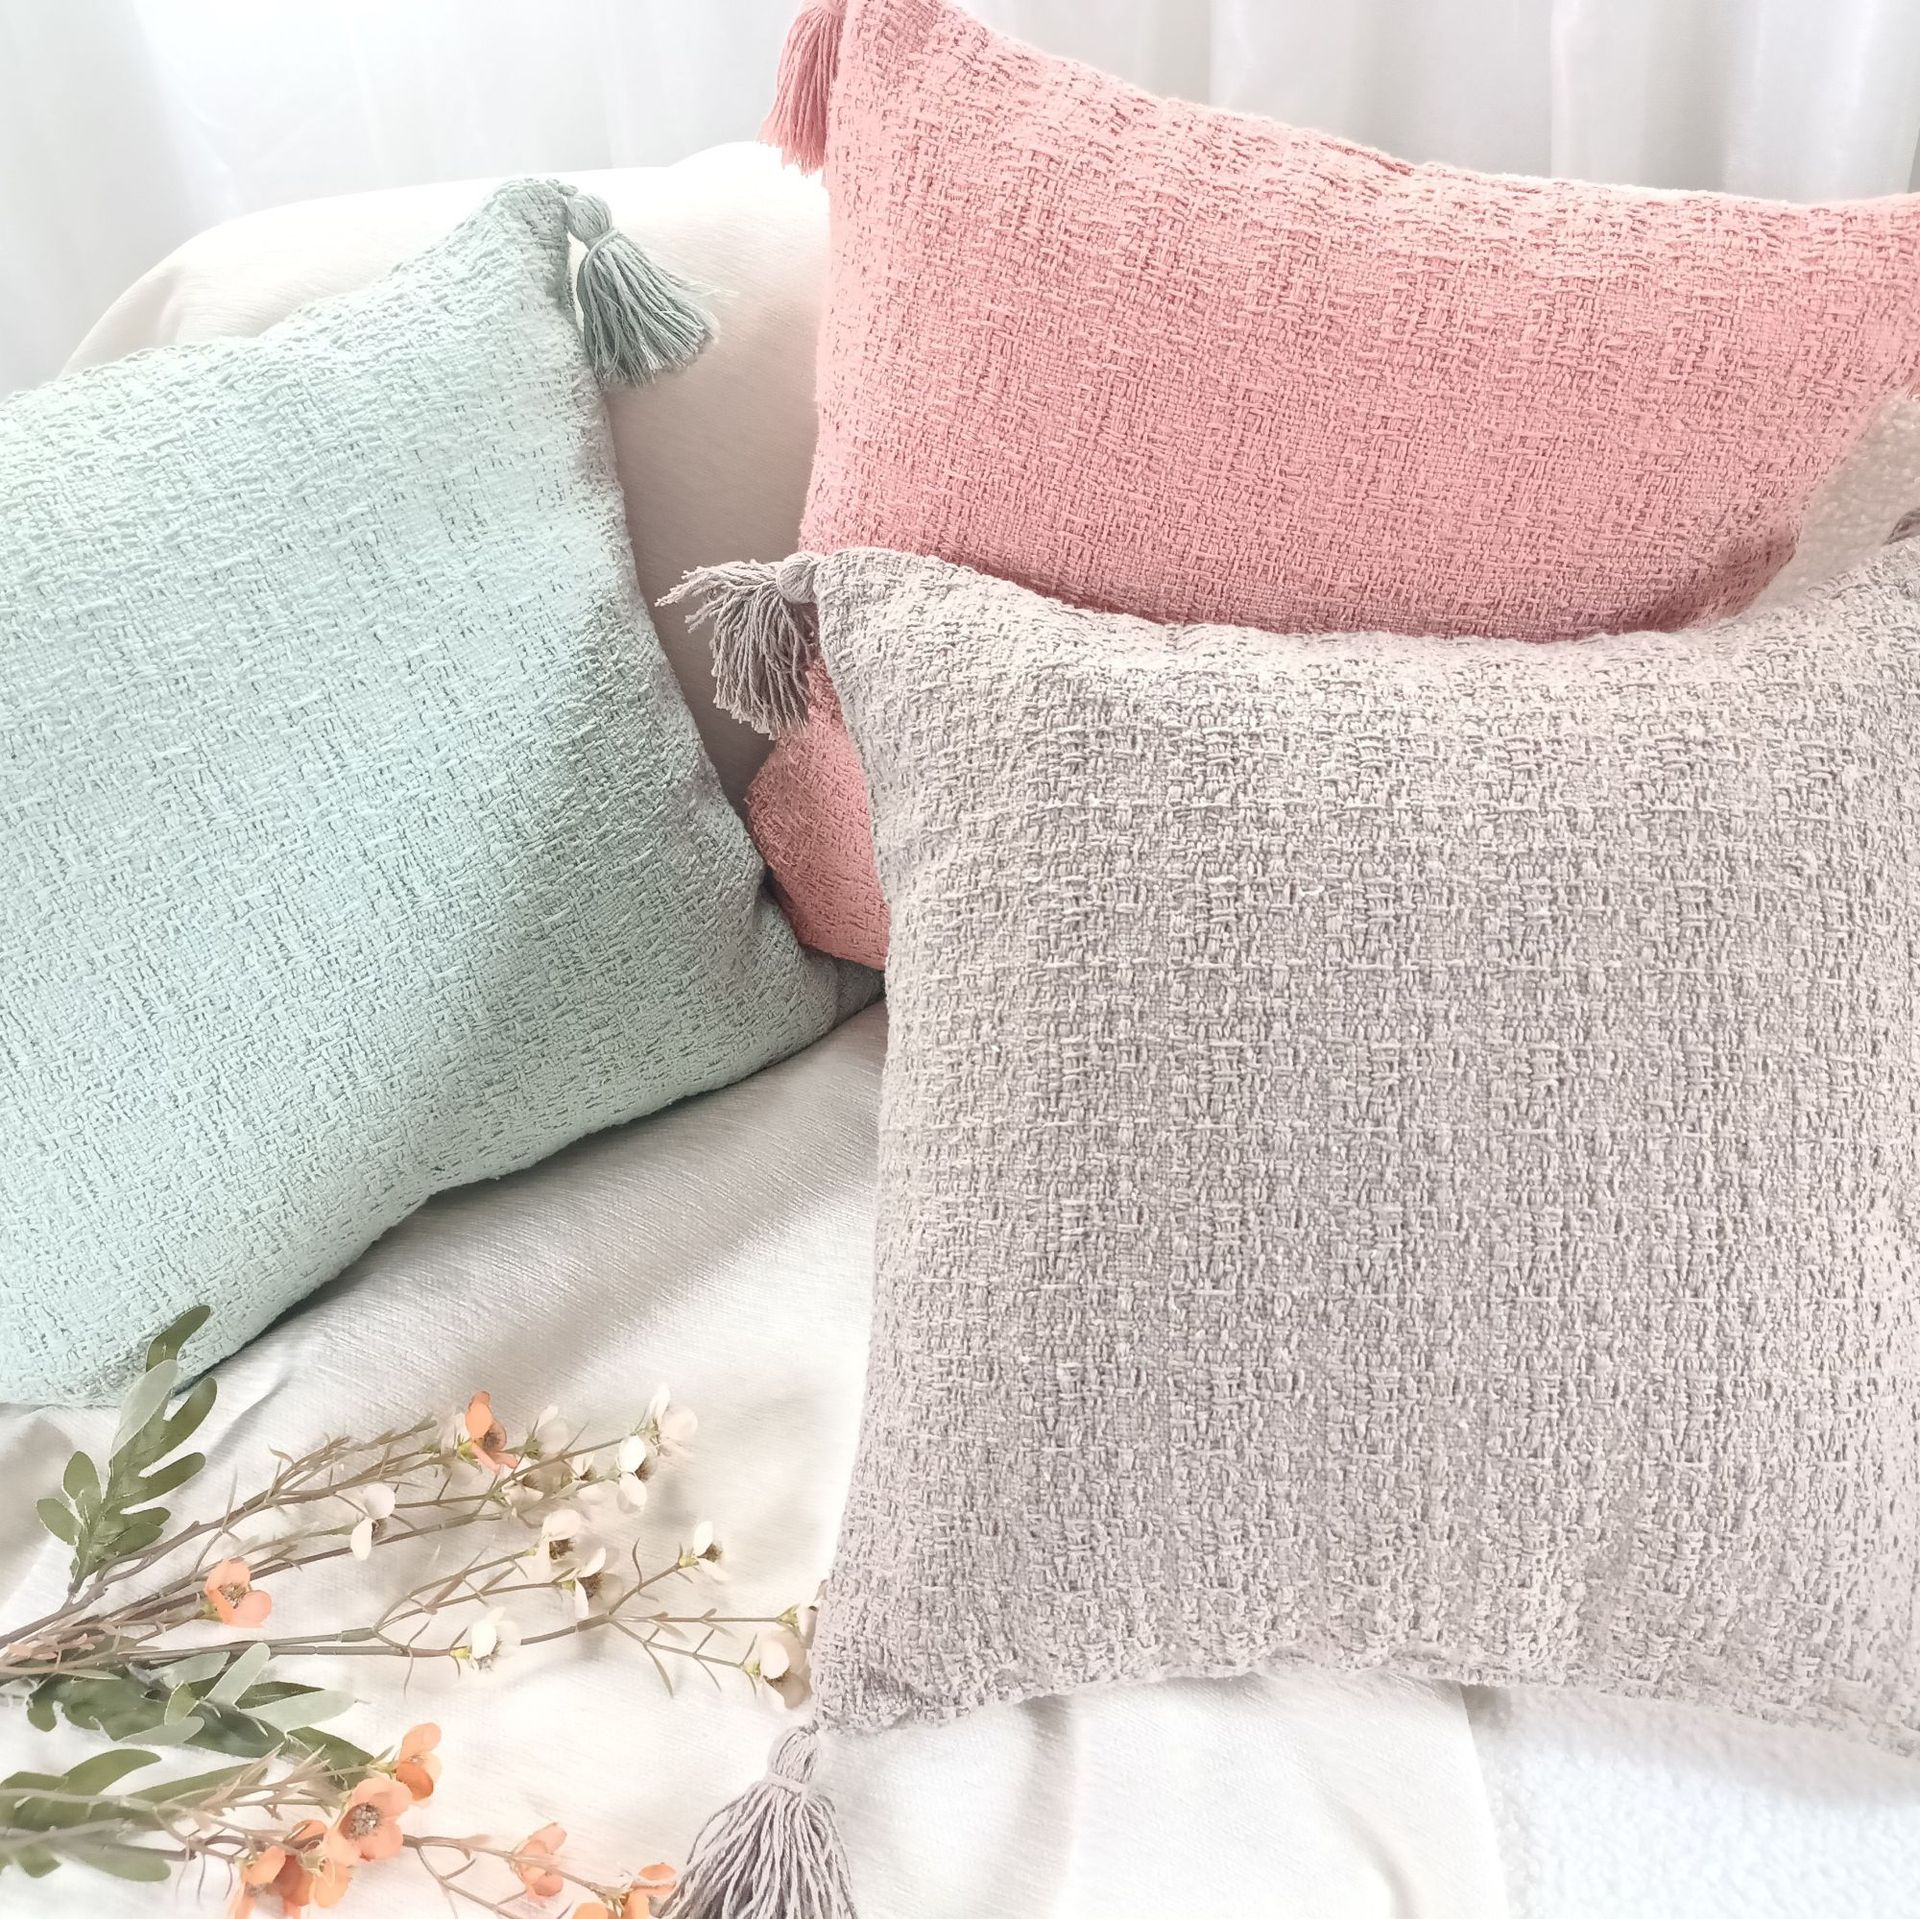 Cotton and Linen Ins Solid Color Pillow Sofa and Bedside Dormitory Students Pillow Cover without Core Miji Woven Back Cushion